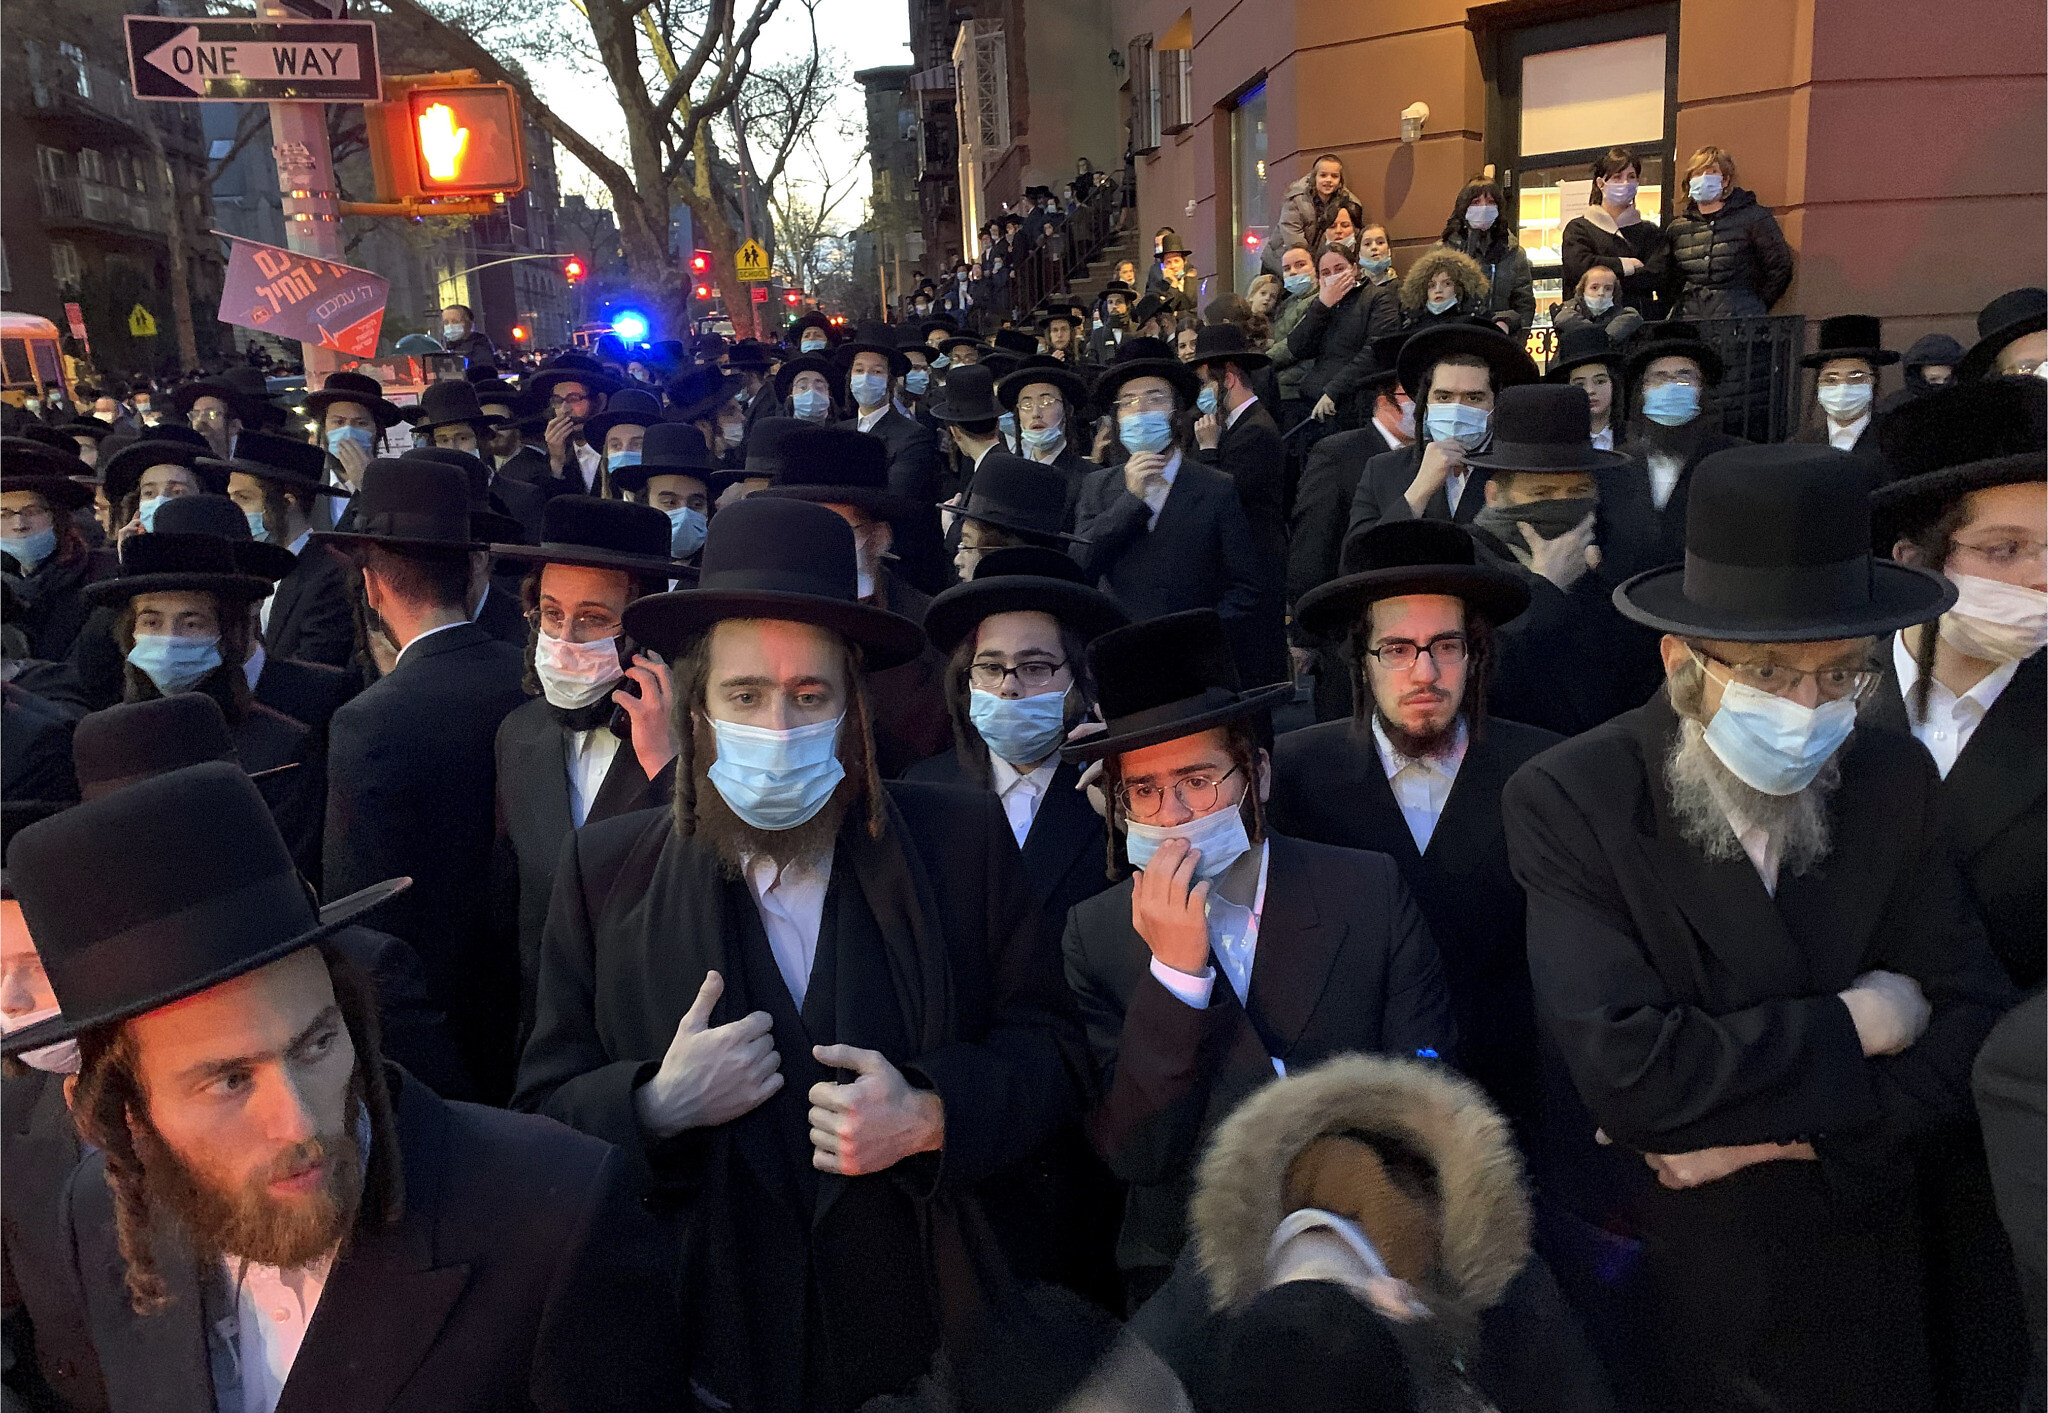 Hundreds of mourners gather in the Brooklyn borough of New York, Tuesday, April 28, 2020, to observe a funeral for Rabbi Chaim Mertz, a Hasidic Orthodox leader whose death was reportedly tied to the coronavirus. The stress of the coronavirus' toll on New York City's Orthodox Jews was brought to the fore on Wednesday after Mayor Bill de Blasio chastised "the Jewish community" following the breakup of the large funeral that flouted public health orders.(Peter Gerber via AP)